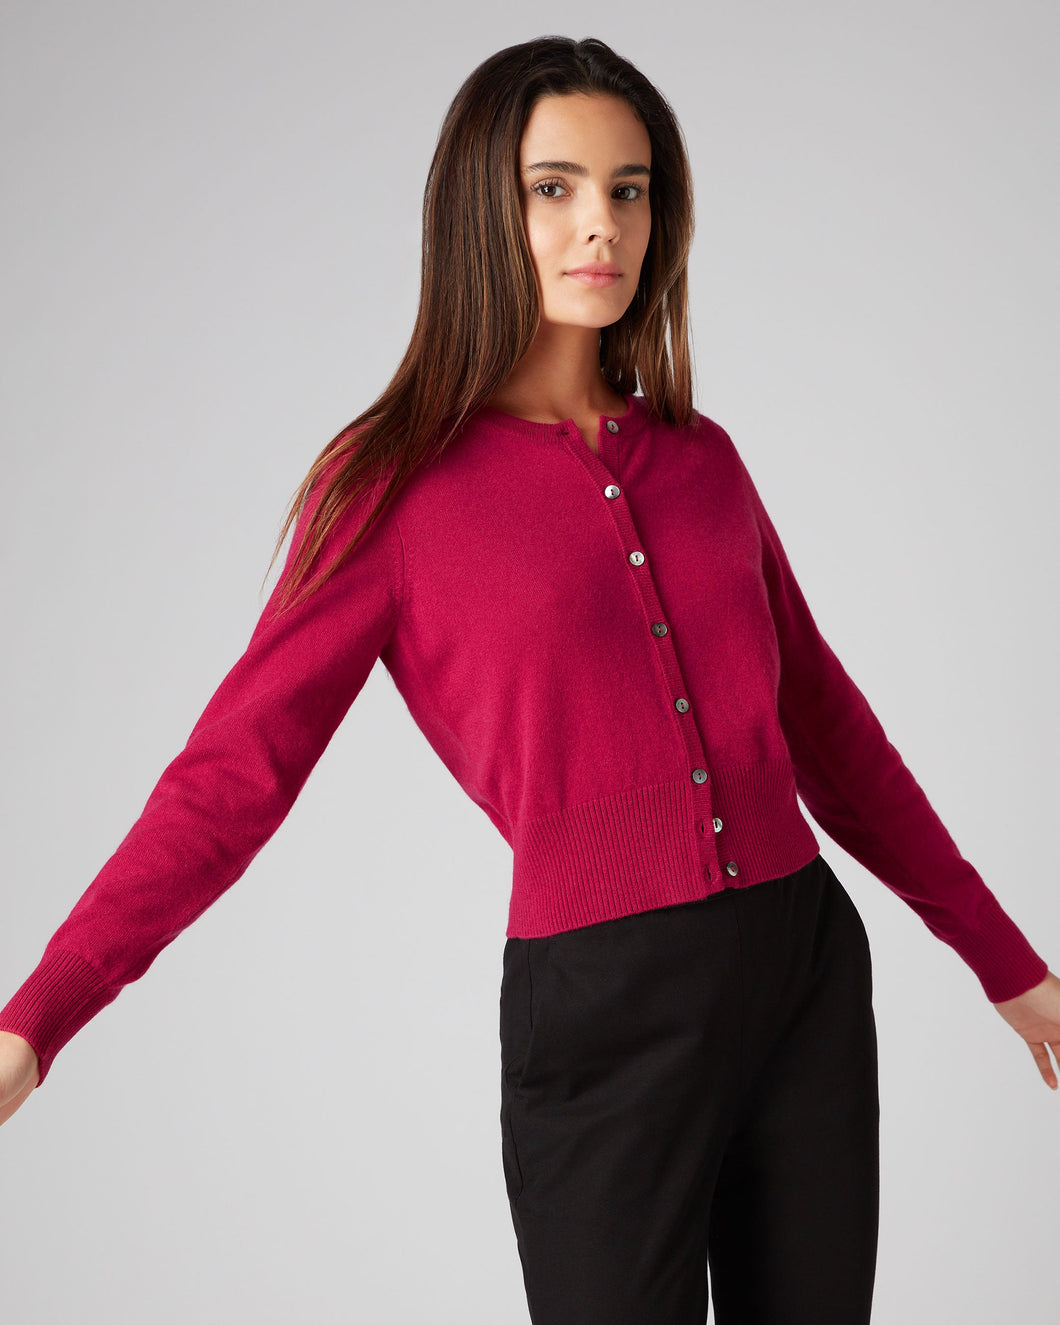 N.Peal Women's Long Sleeve Cropped Cashmere Cardigan Raspberry Pink